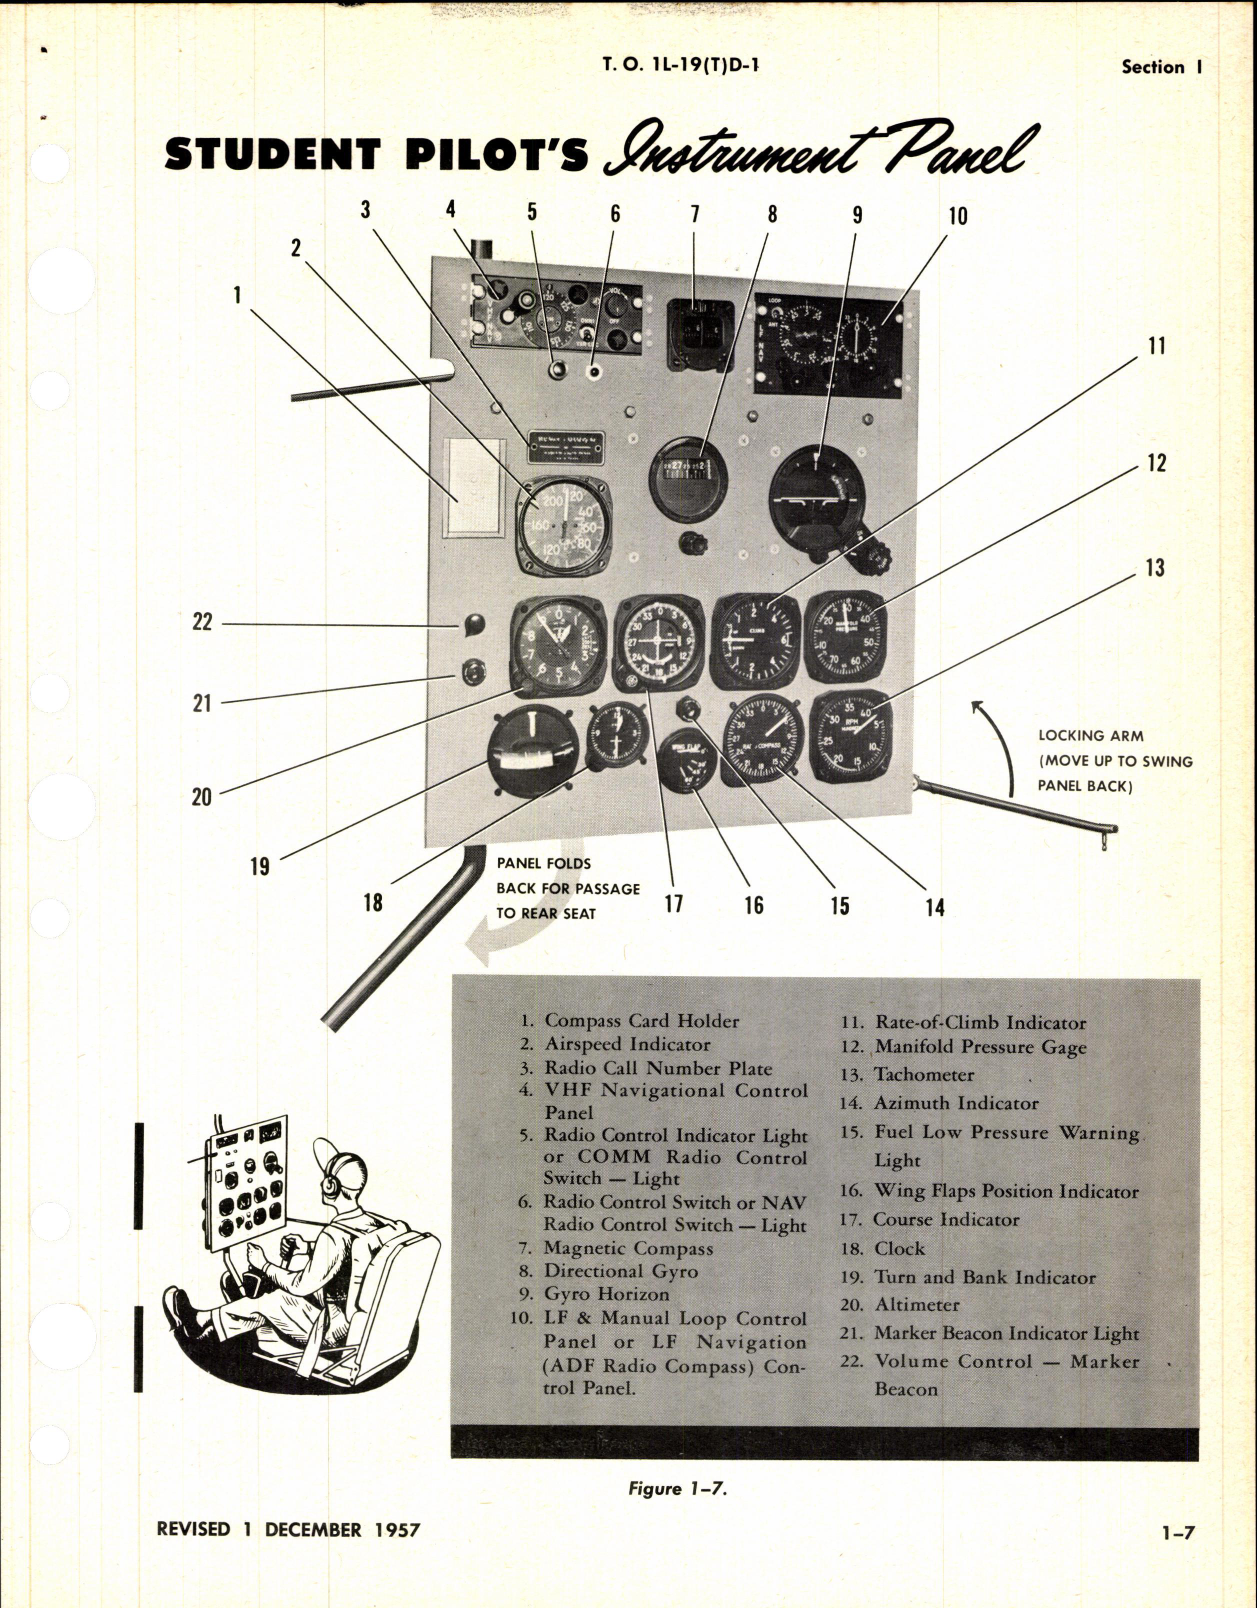 Sample page 5 from AirCorps Library document: Flight Handbook for TL-19D Aircraft